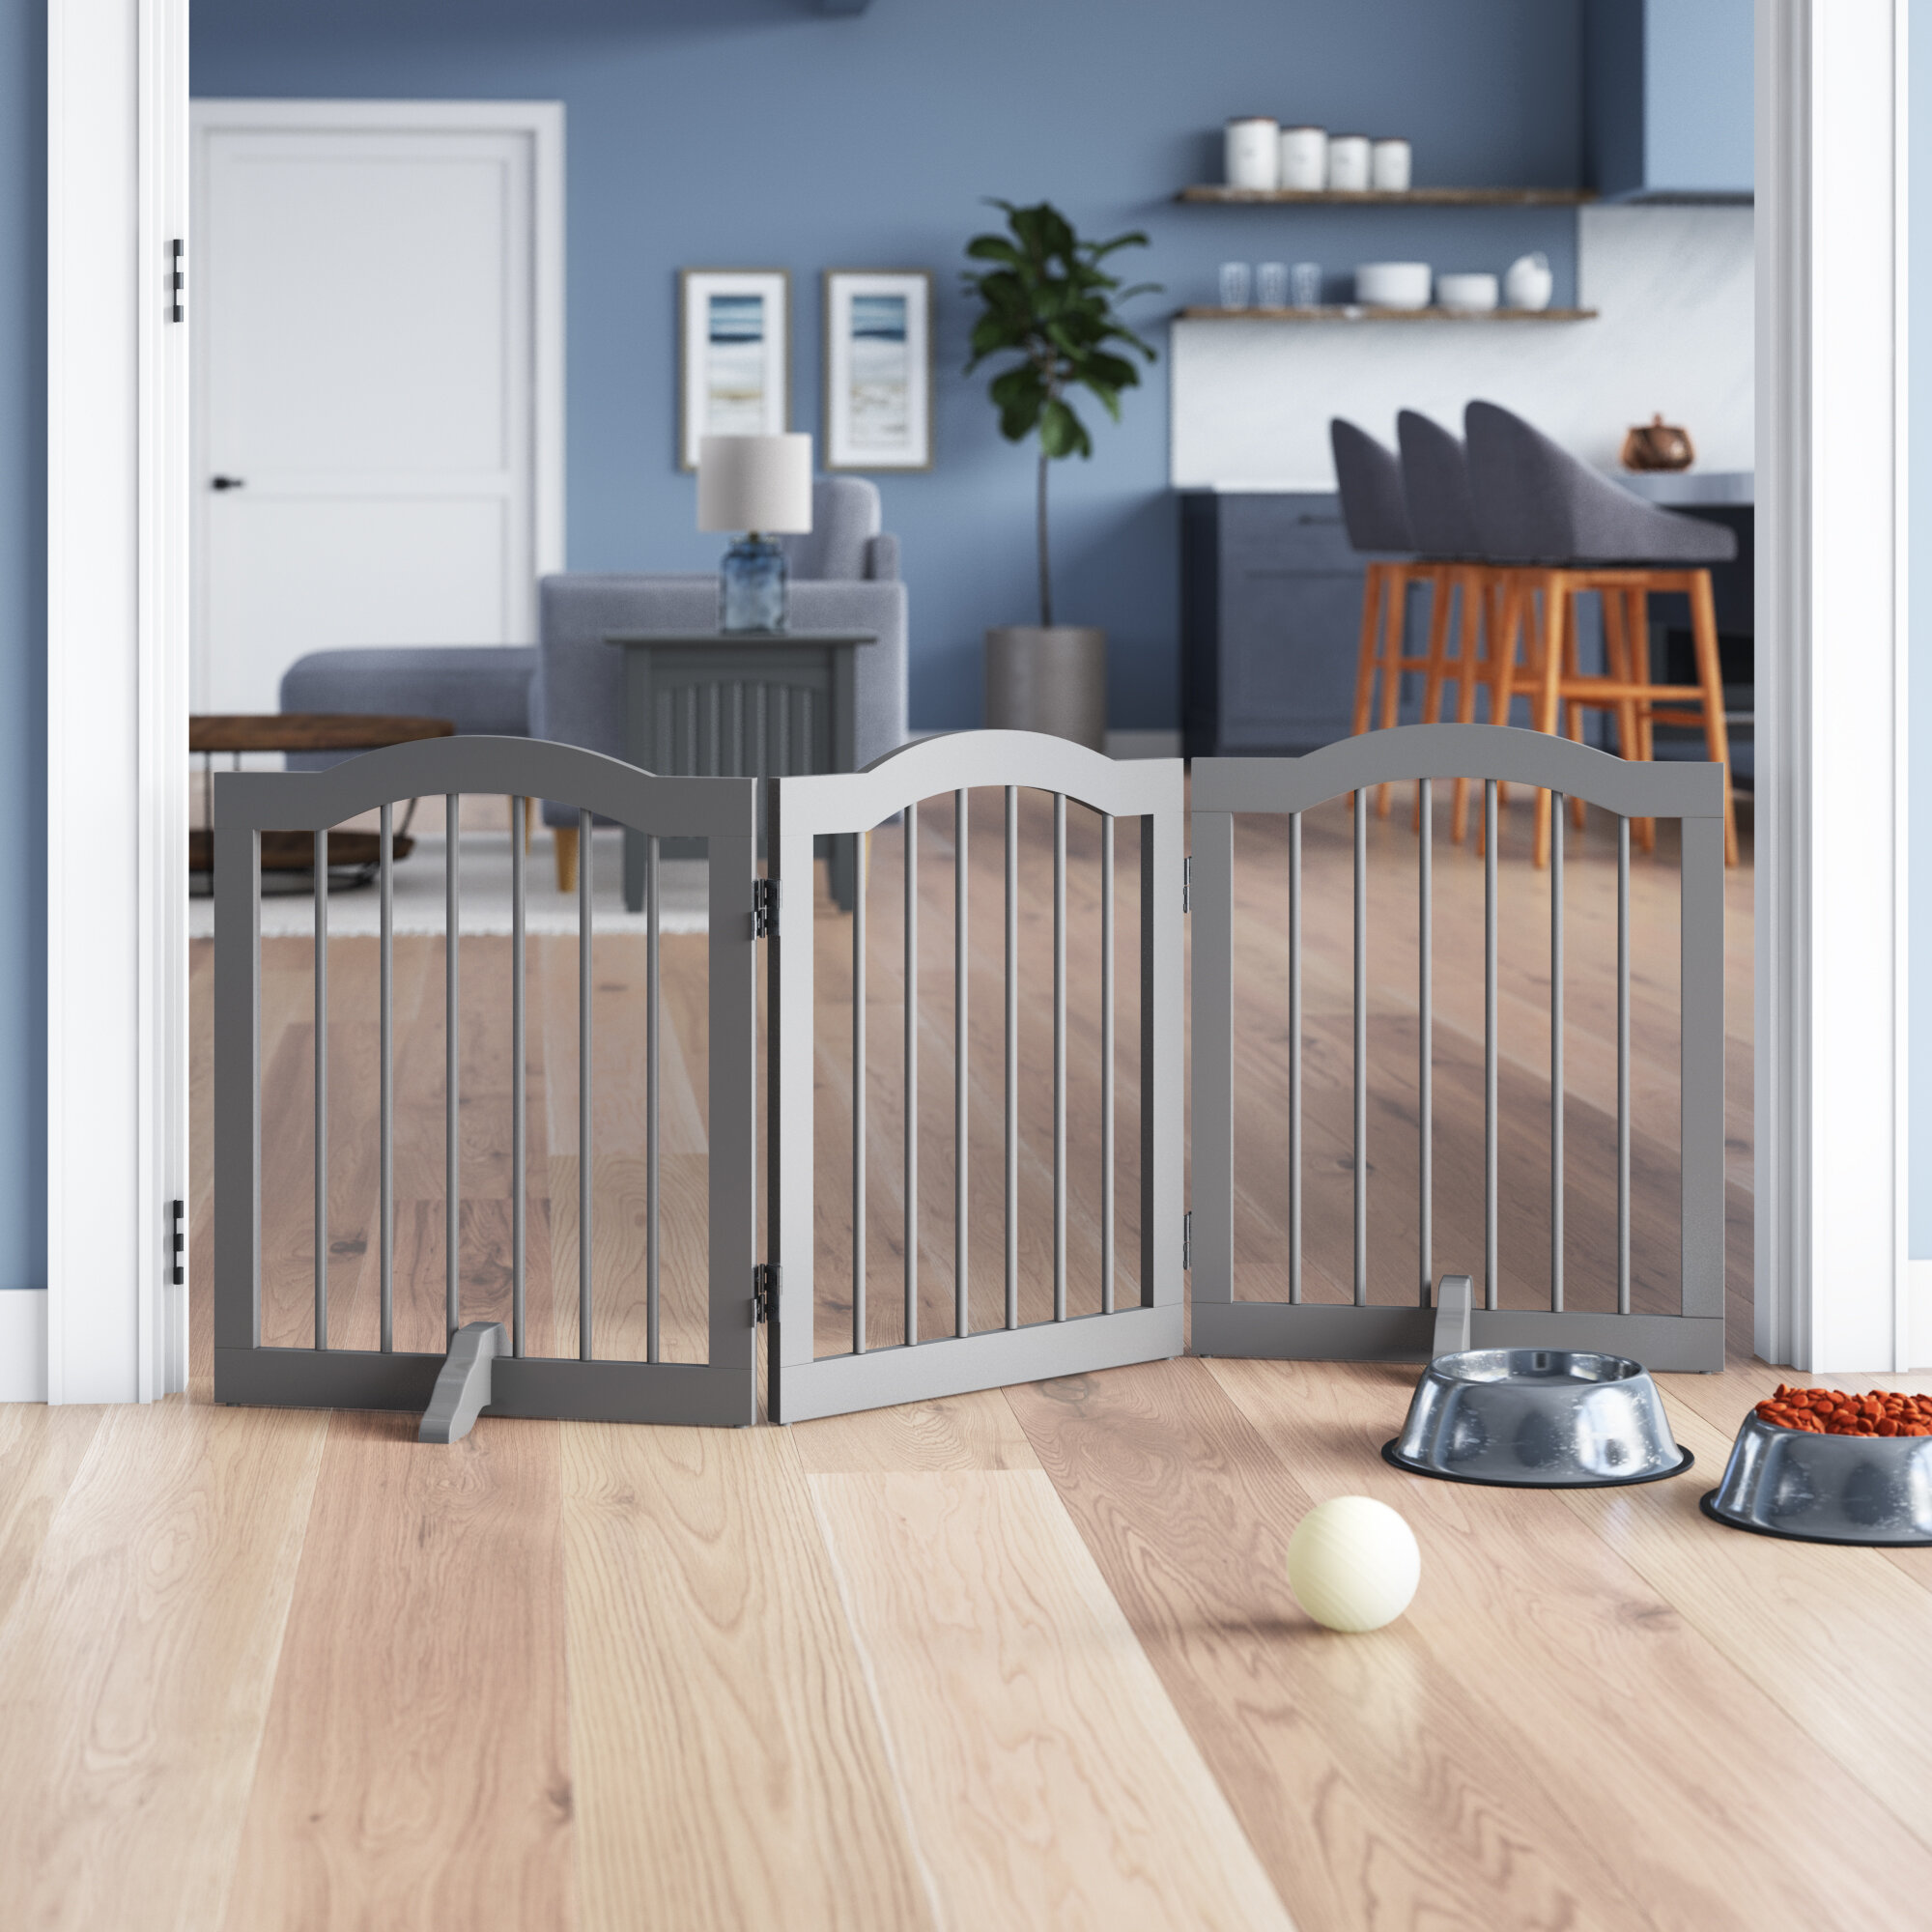 LZRS Oak Wood Foldable Pet Gate,Wooden Dog Gate,Cat Gate,Pet Gate with Pet Collar for House Doorway Stairs,Freestanding Indoor Outdoor Gate Safety Fence